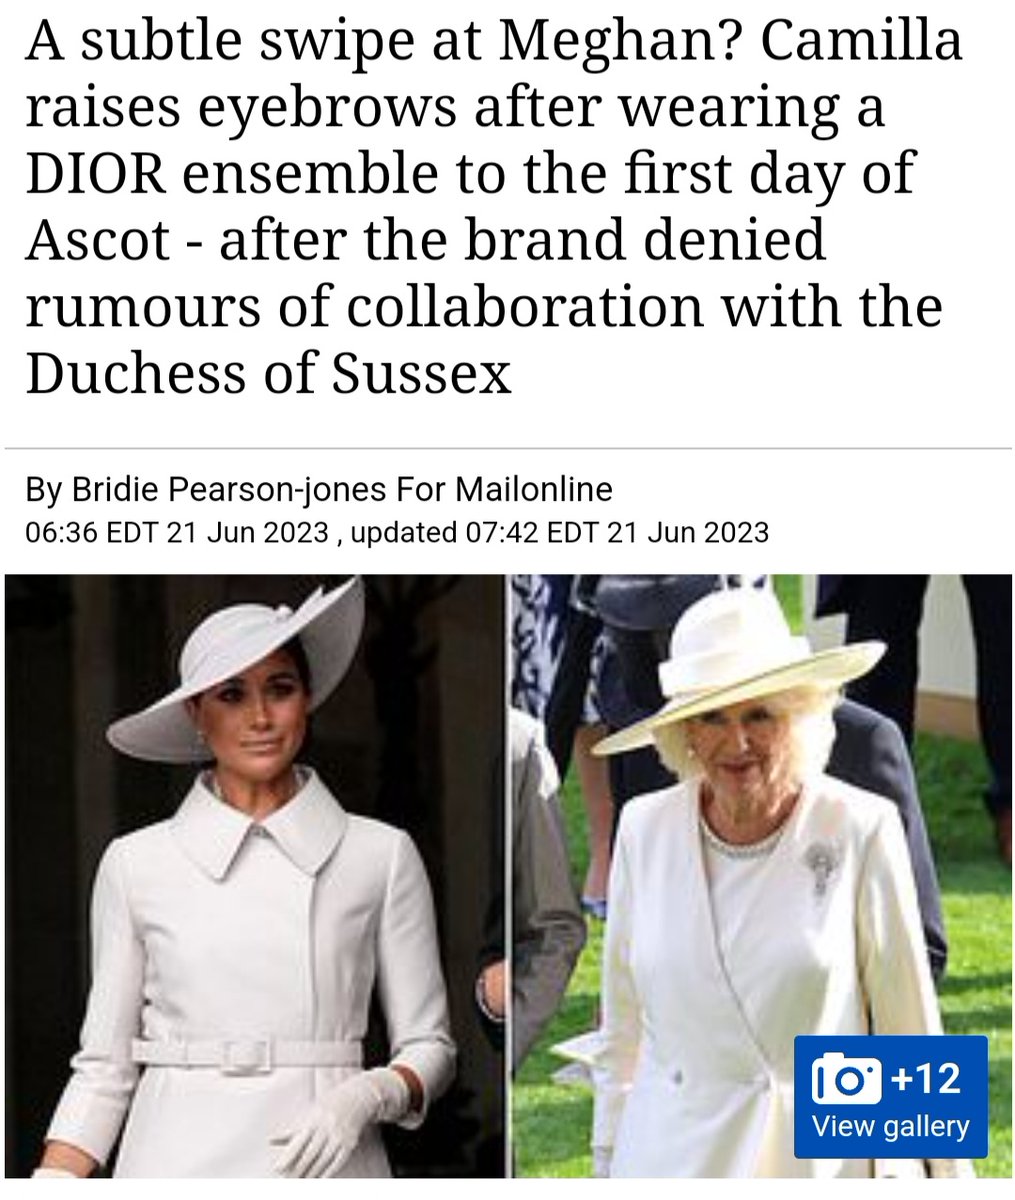 Oh look!  All the lies about #meghanmarkle in talks with #dior Queen Camilla went out yesterday and purchased a tailored #Dior 
#rachelragland #dailymaillies #meghansmollett 
#HarryandMeghanRagland